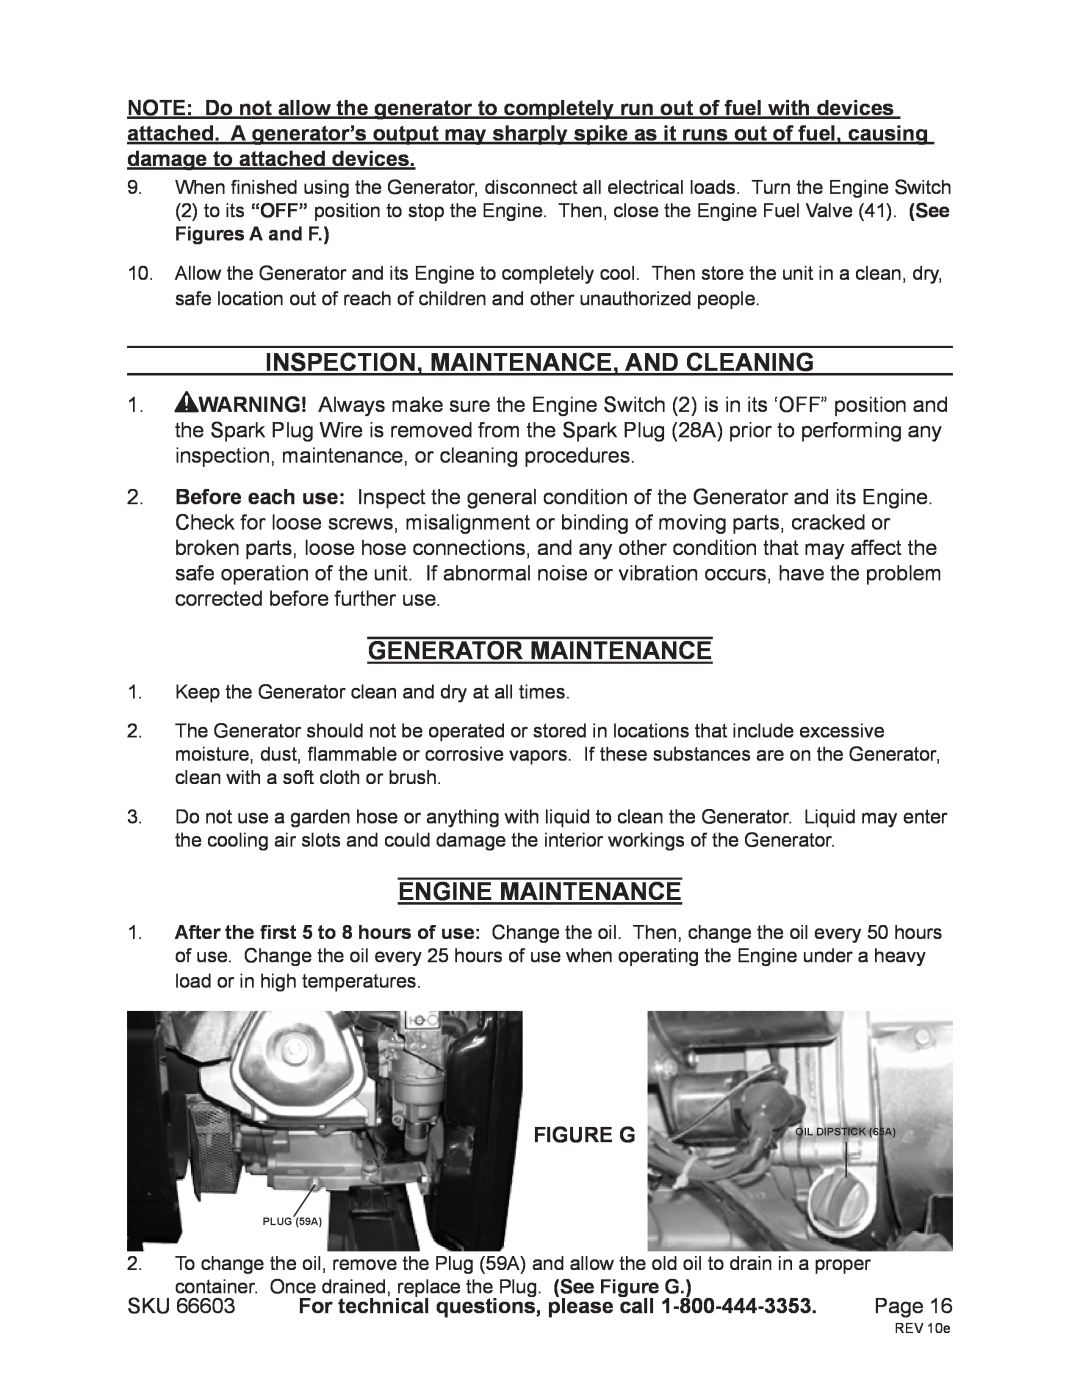 Chicago Electric 66603 Inspection, Maintenance, And Cleaning, Generator Maintenance, Engine Maintenance, Figure G, Page 